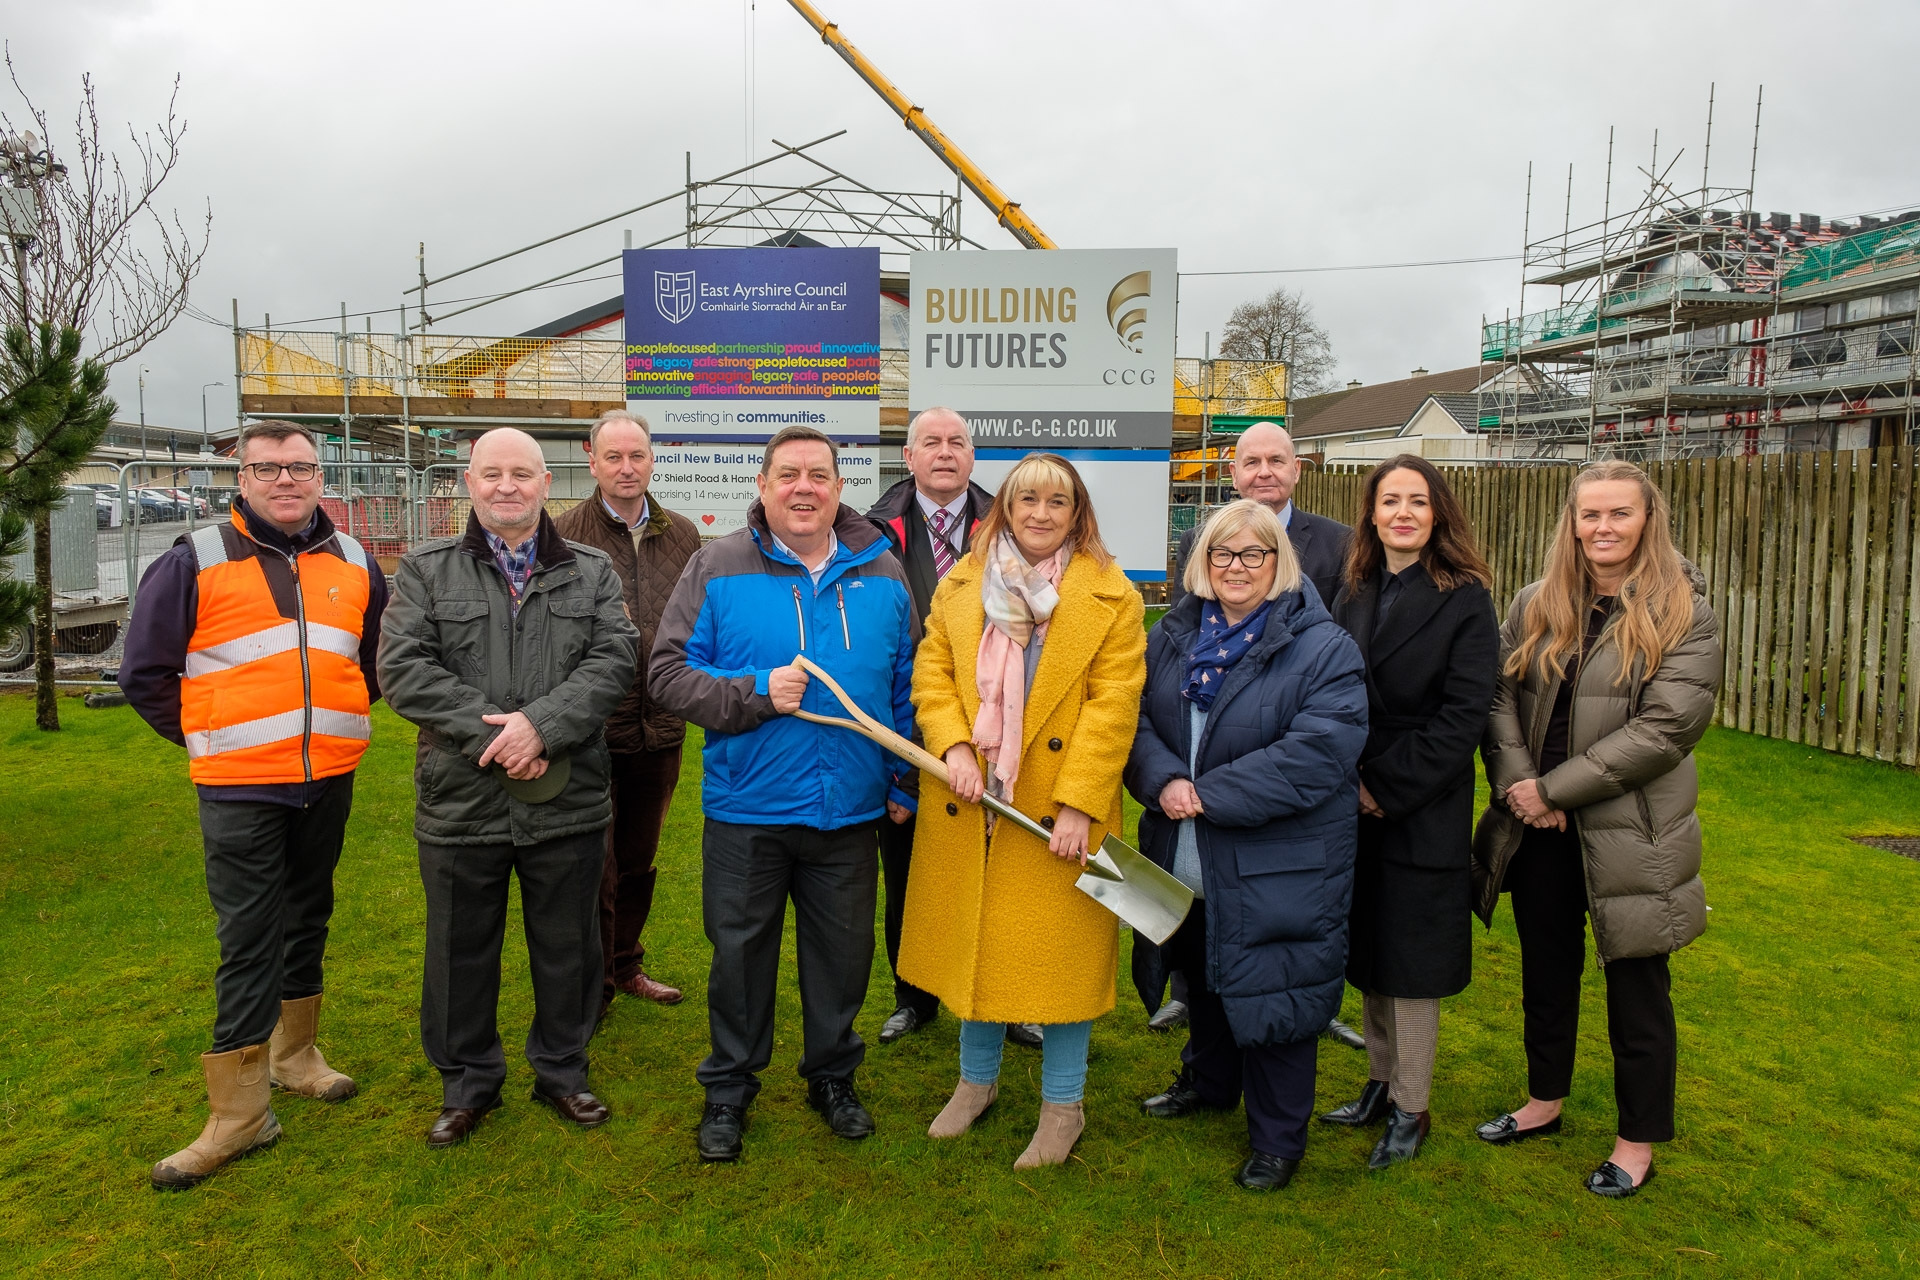 Work starts on two East Ayrshire Council developments